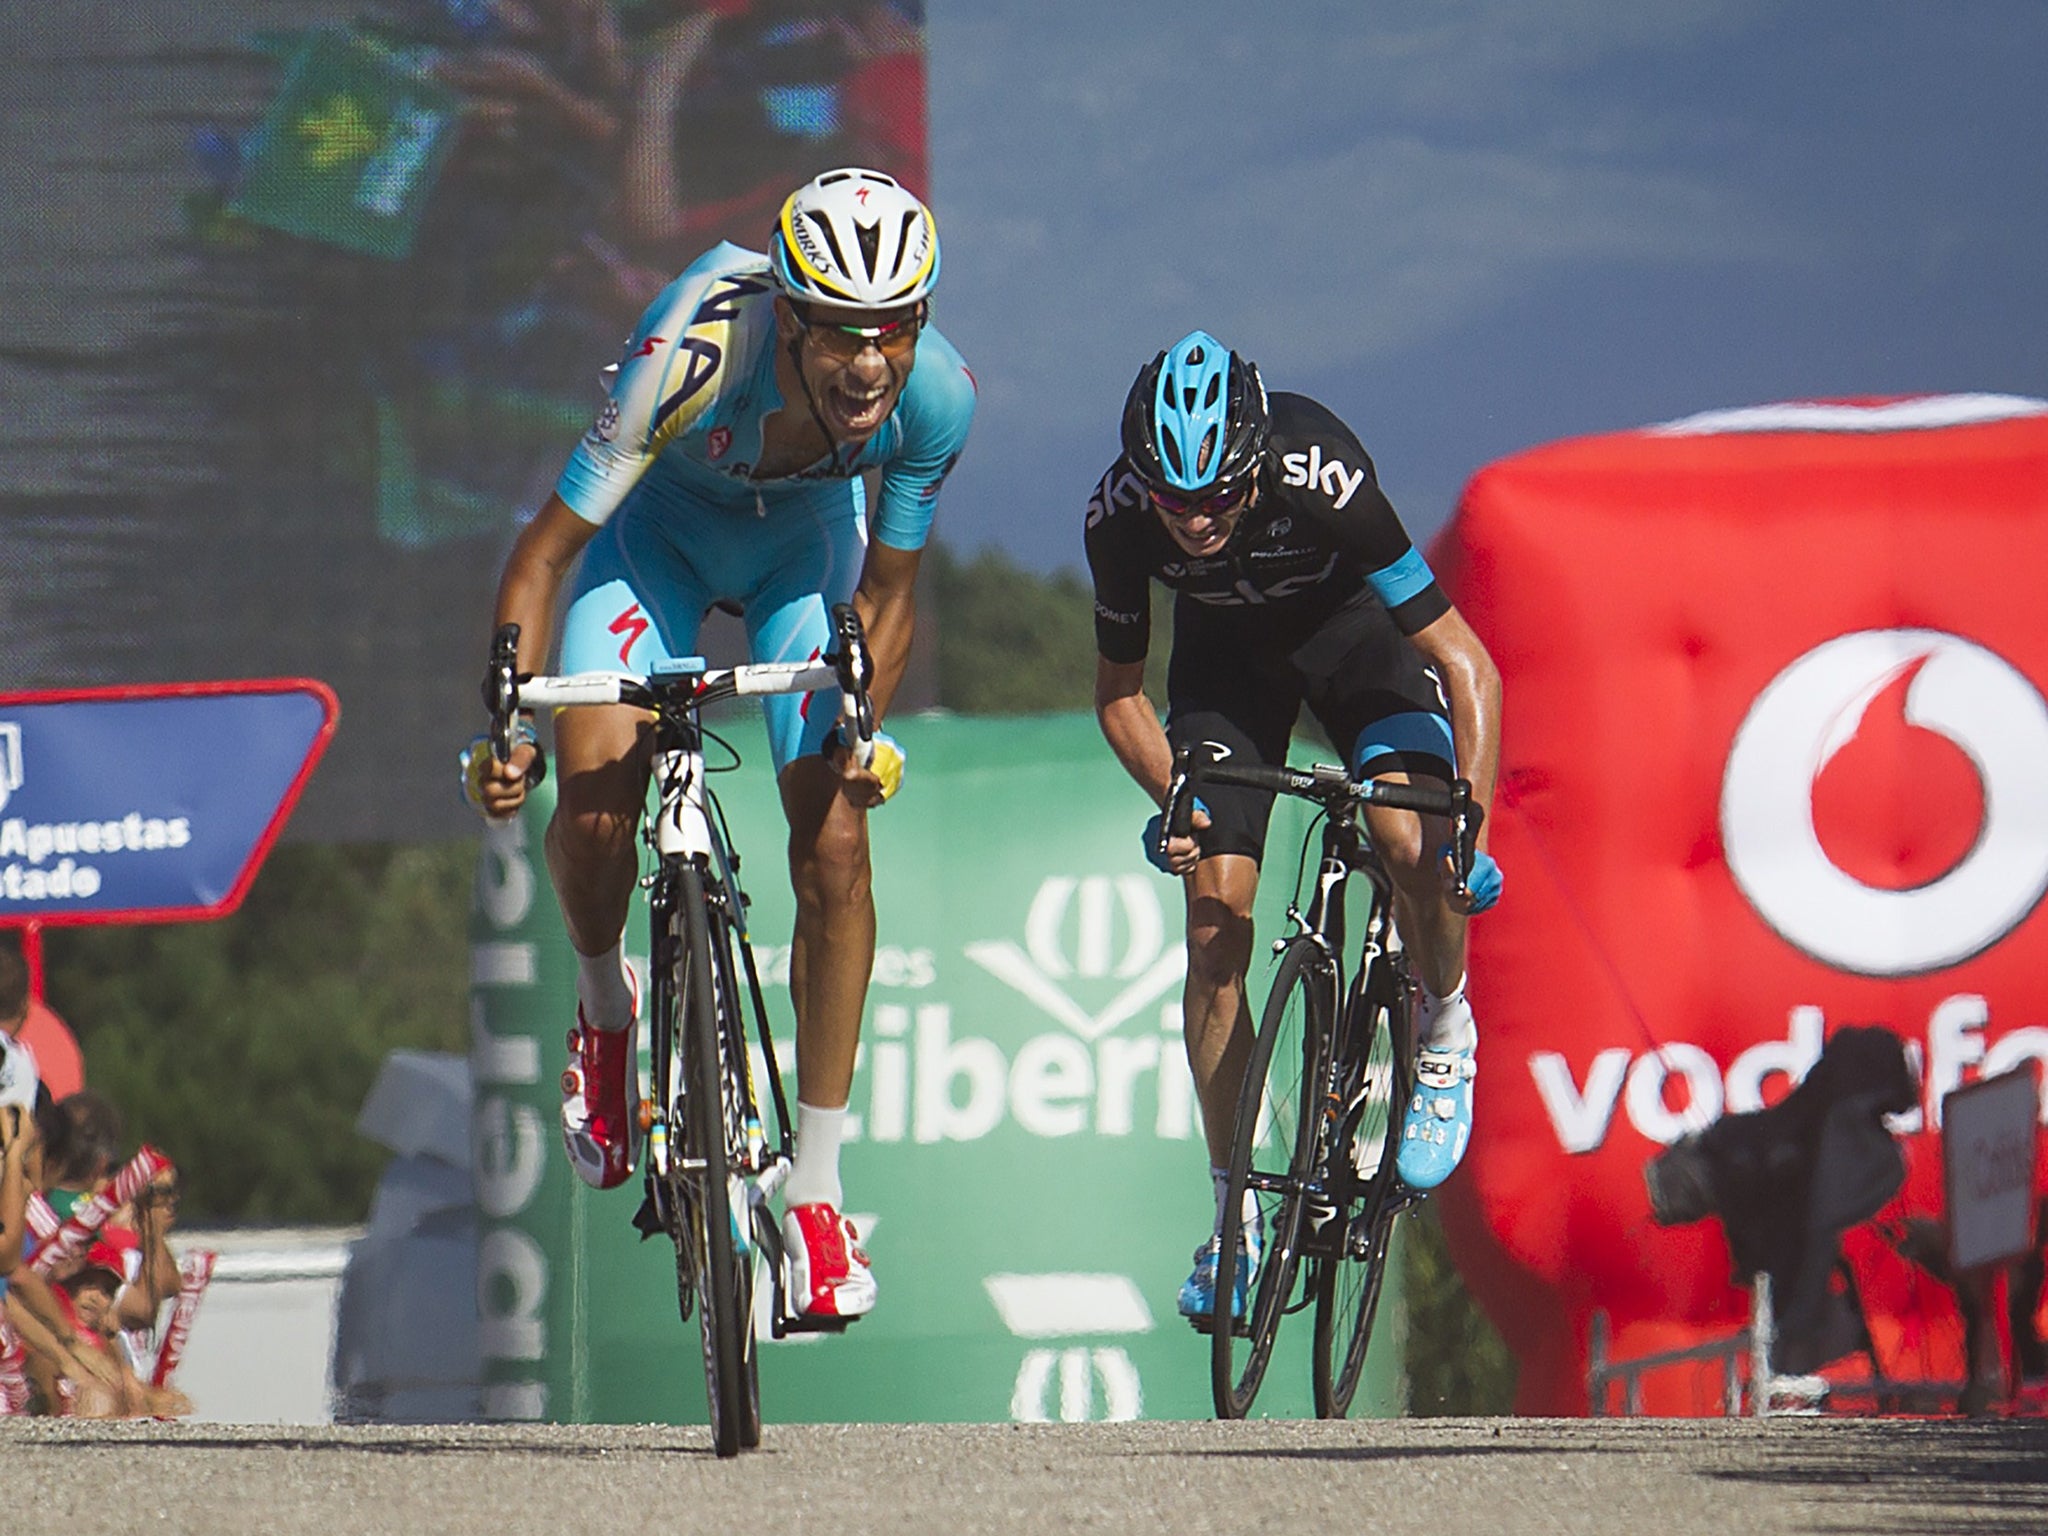 Chris Froome (right) is pipped for the stage win by Italy’s Fabio Aru at the top of Monte
Castrove yesterday